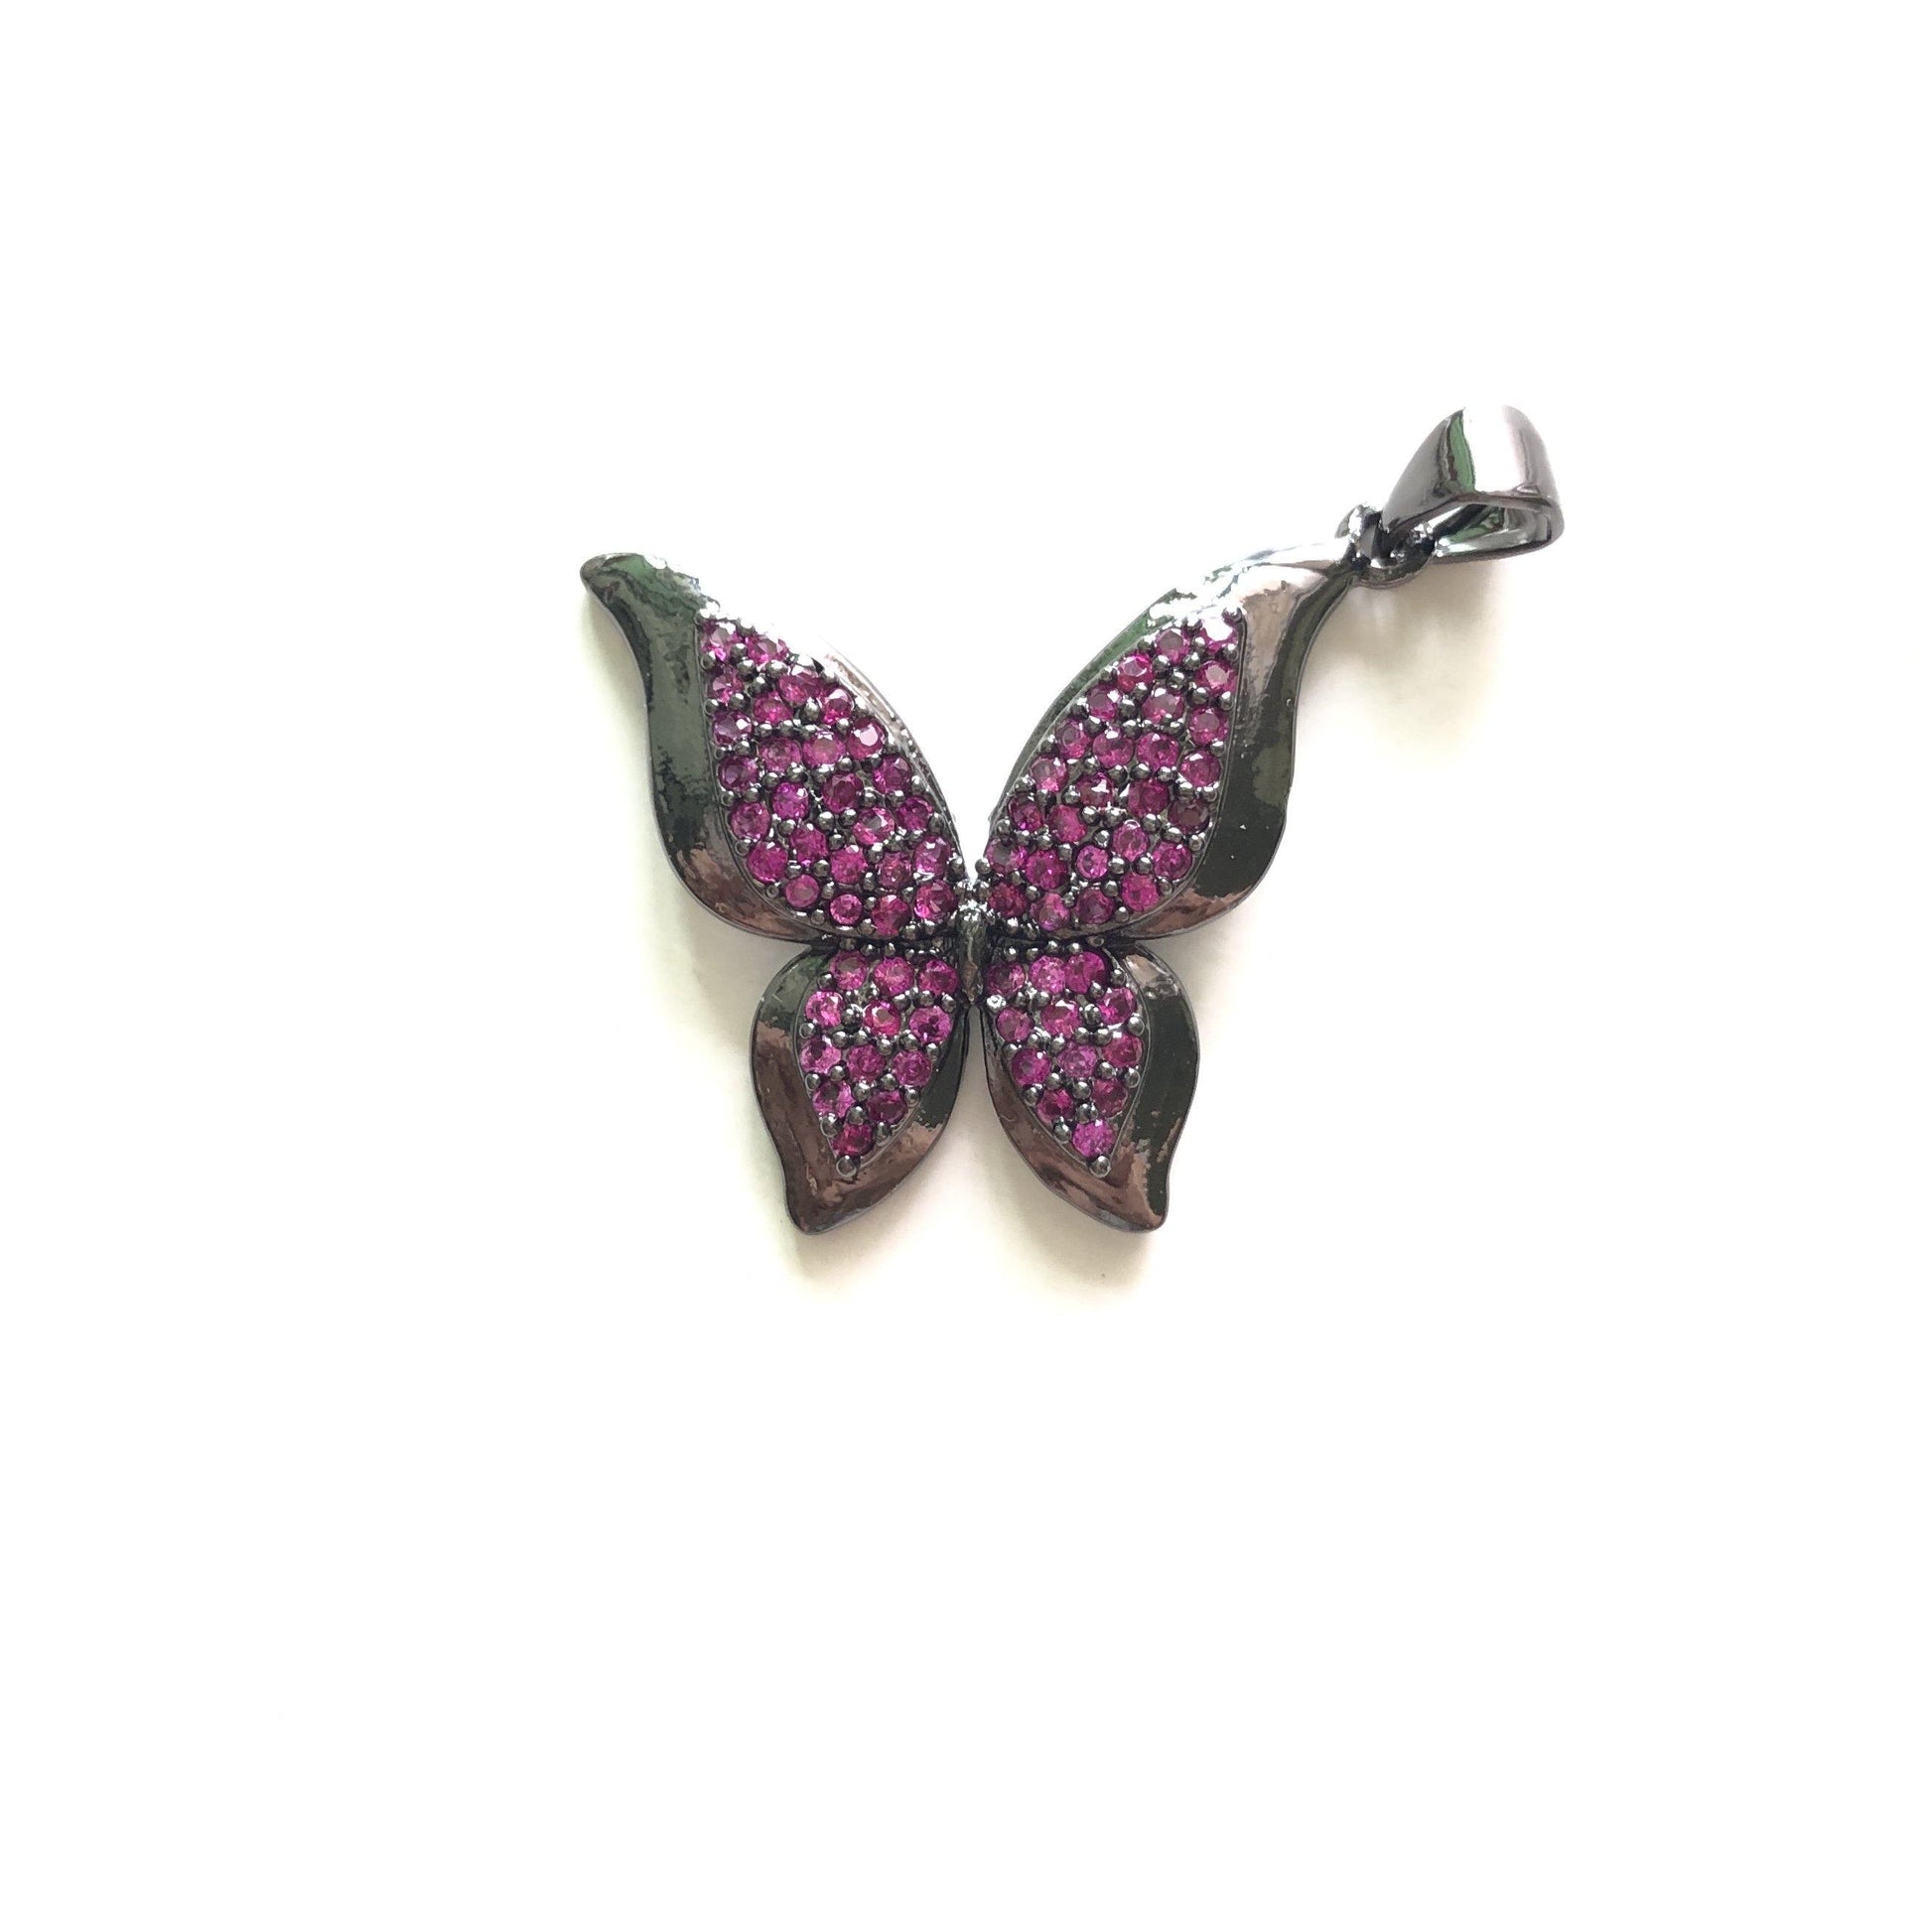 5pcs/lot 27*23mm Multicolor CZ Paved Butterfly Charms Fuchsia on Black CZ Paved Charms Butterflies Colorful Zirconia Charms Beads Beyond